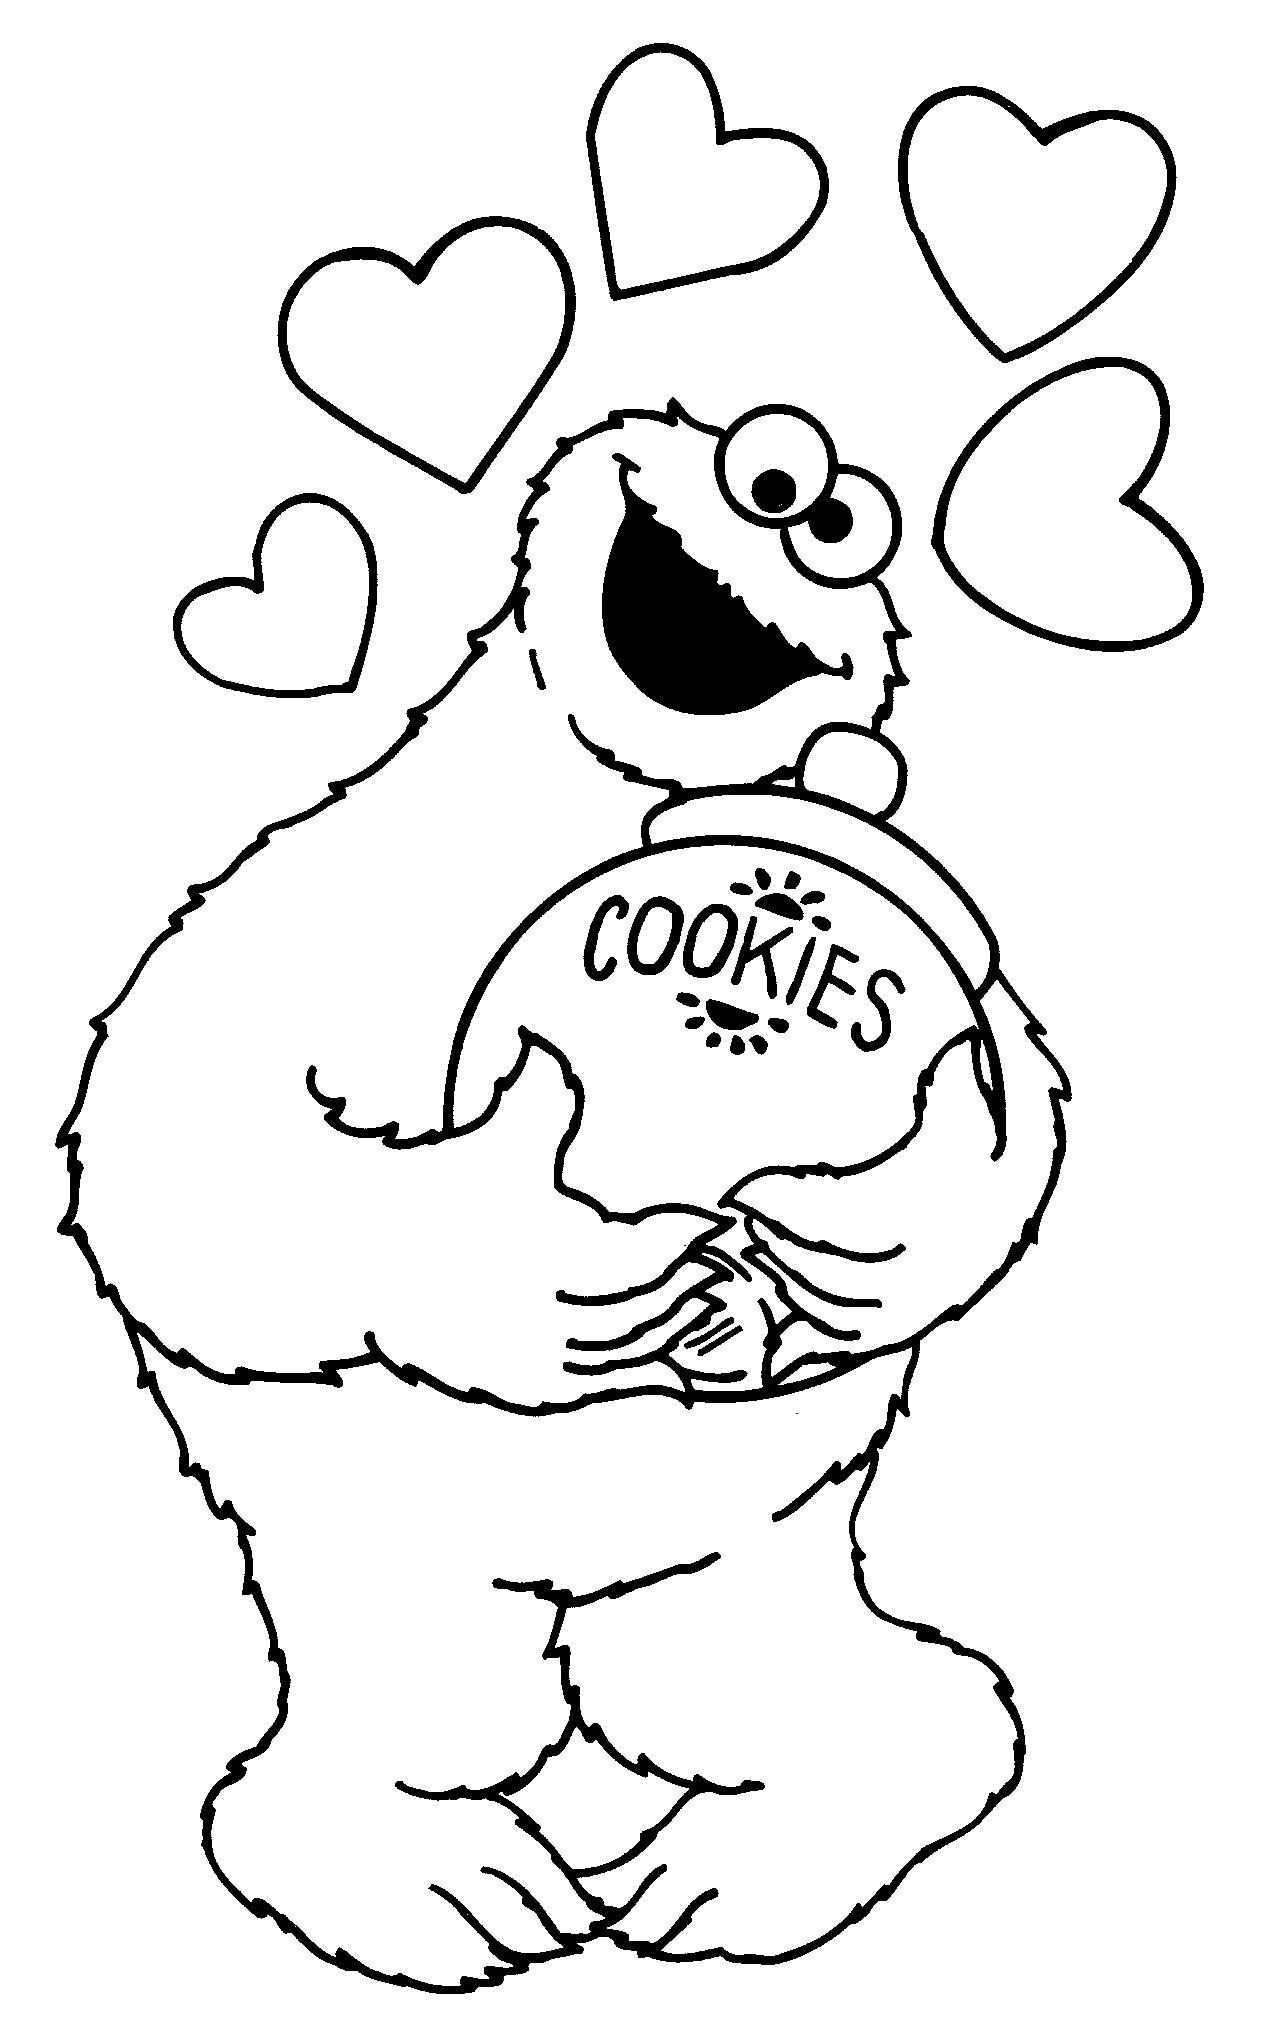 Cookie Monster Cookie Jar Coloring Pages Monster Coloring Pages Sesame Street Coloring Pages Elmo Coloring Pages